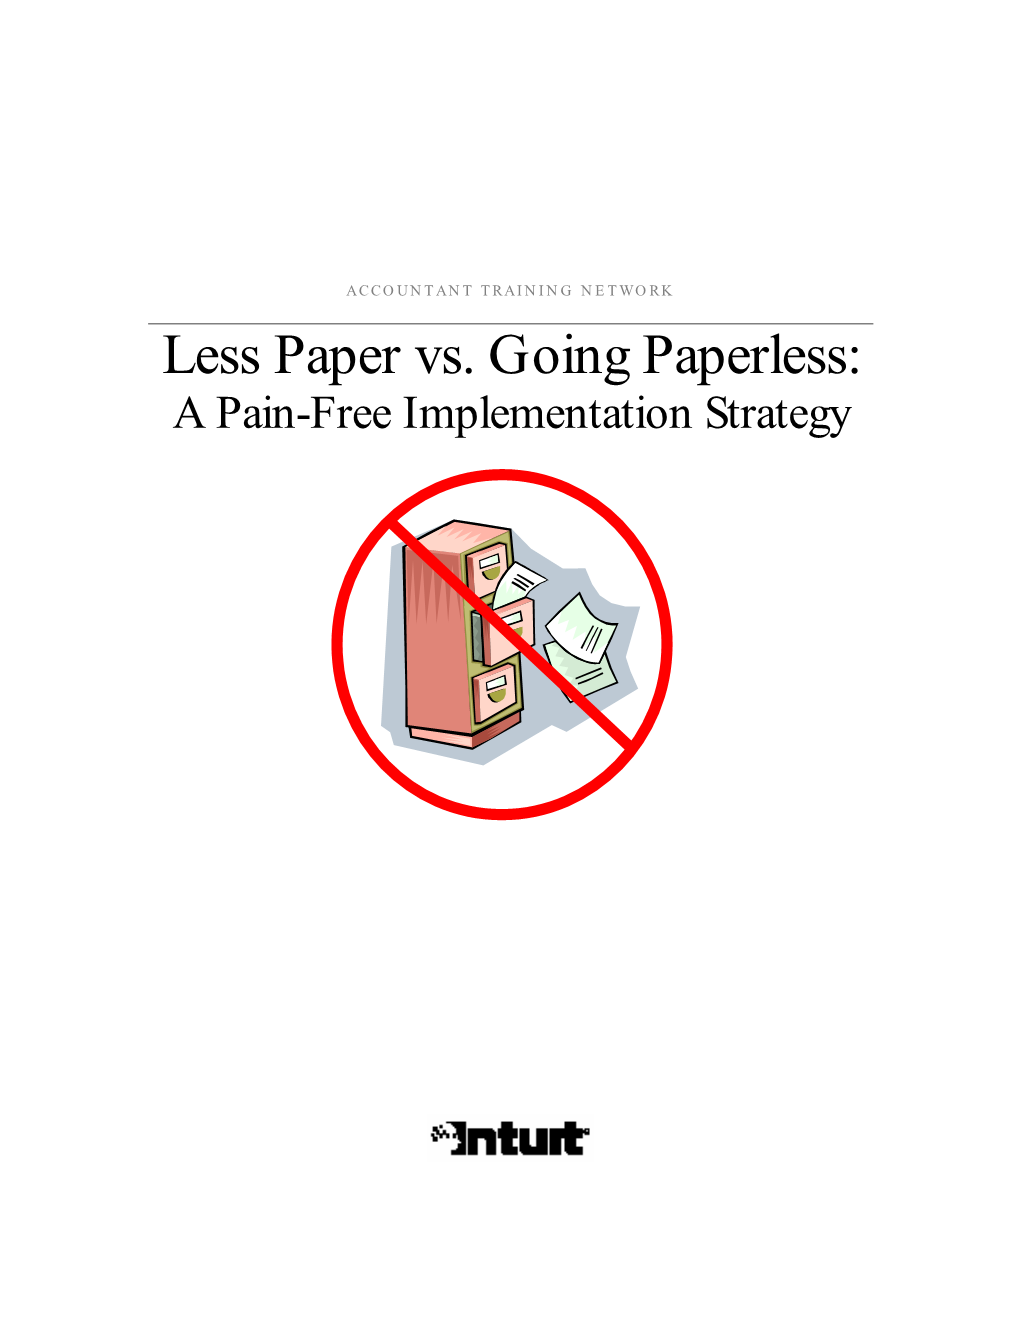 Less Paper Vs. Going Paperless: a Pain-Free Implementation Strategy 2 Table of Contents